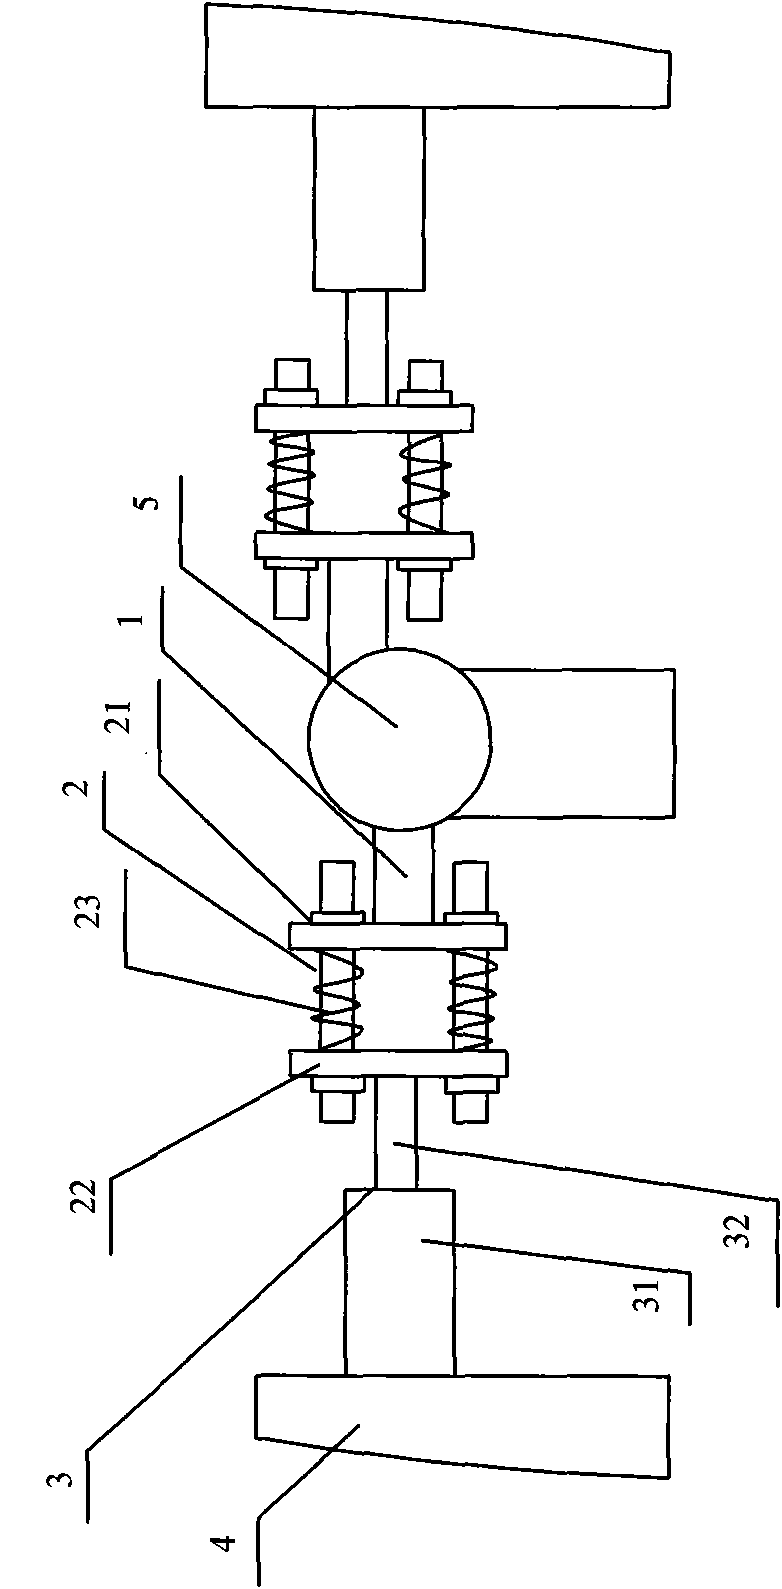 Electroplating cathode conductive device